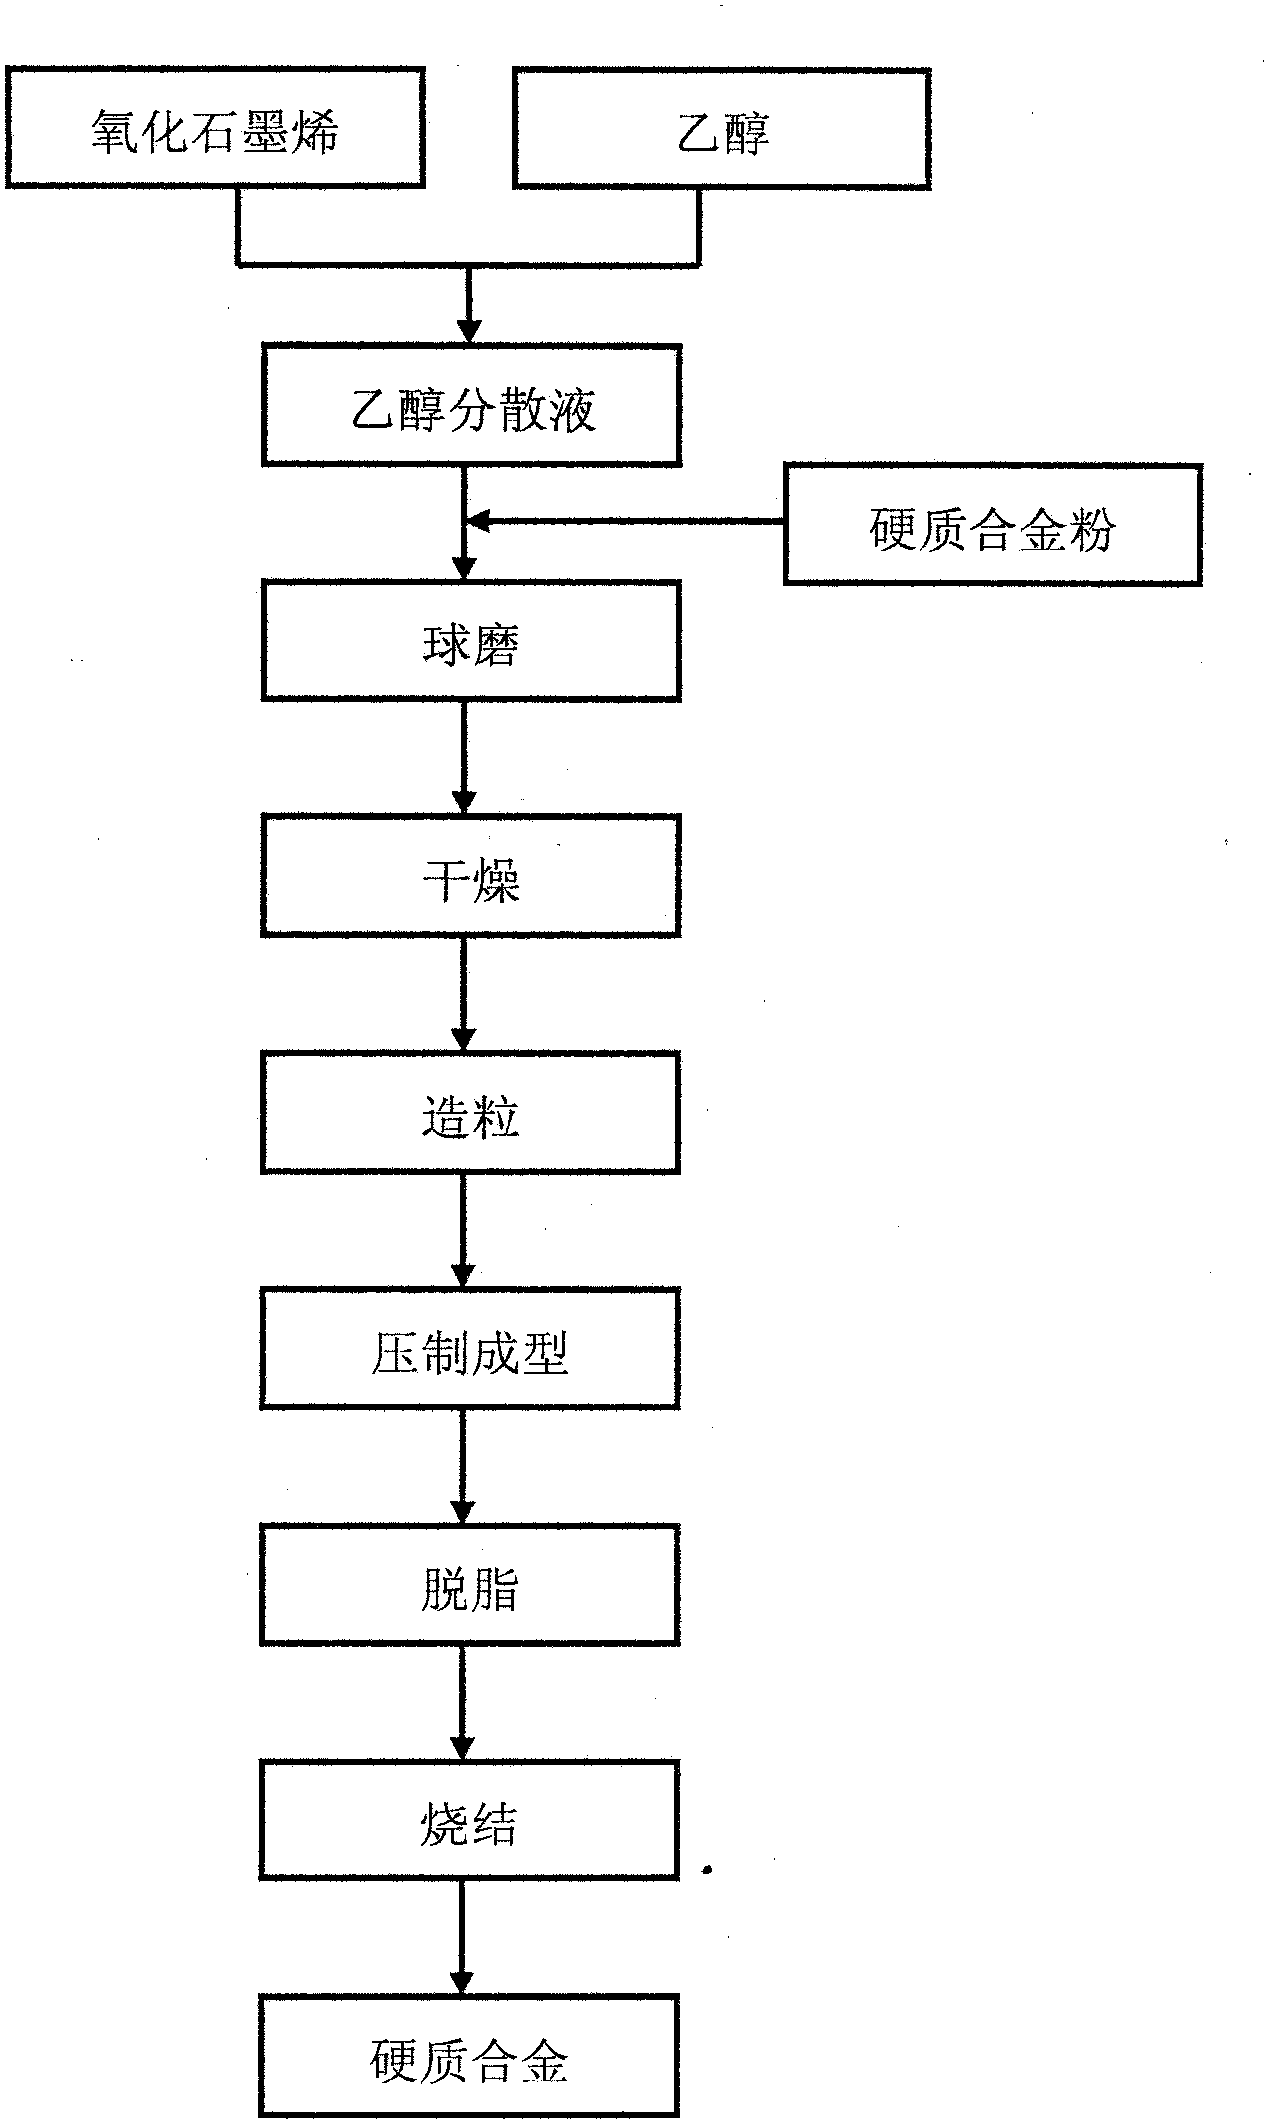 Graphene-modified hard alloy and application thereof